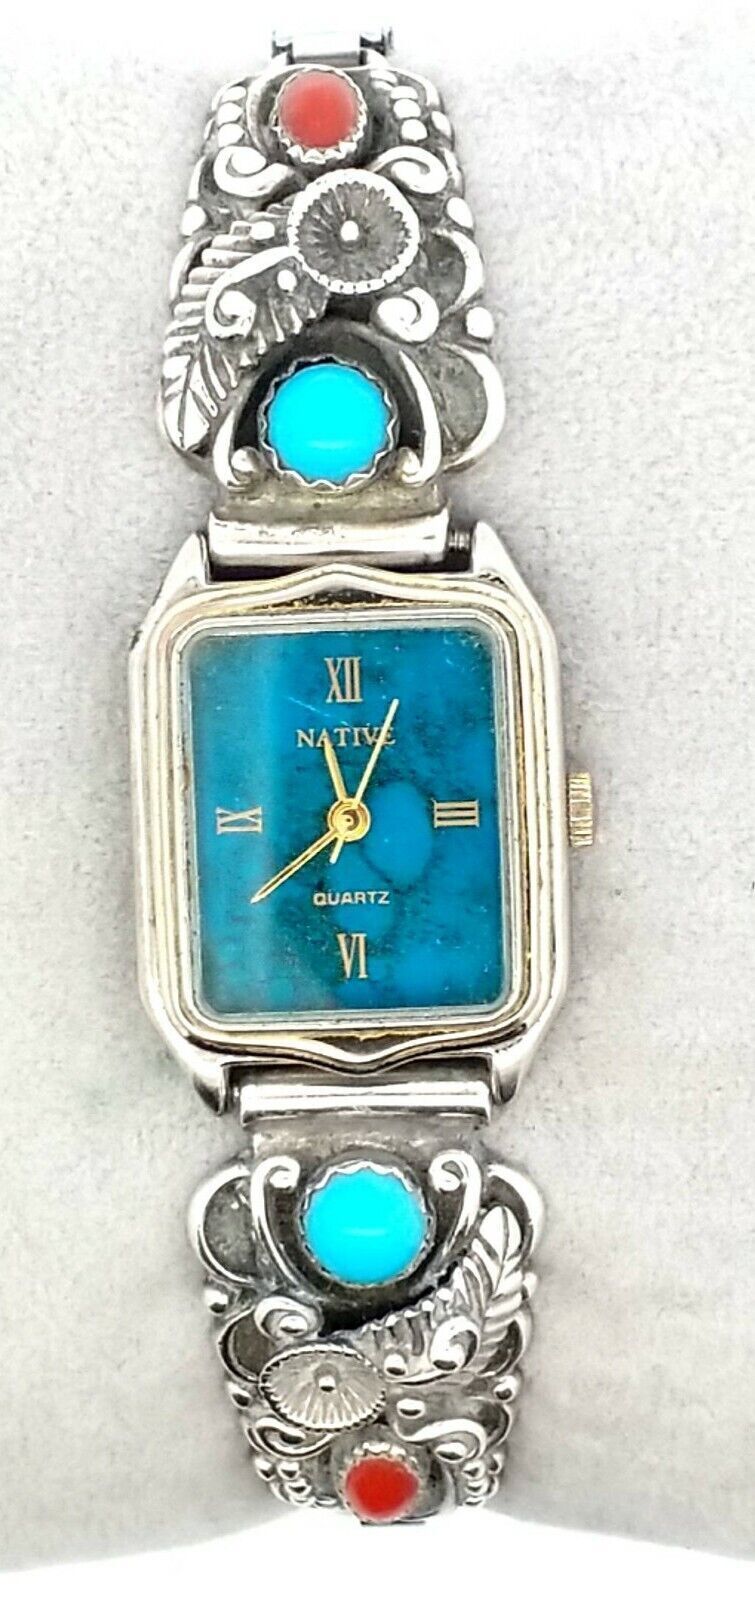 Vintage Navajo STC Sterling Silver Bangle Watch w/ Coral & Turquoise 26.8 Grams